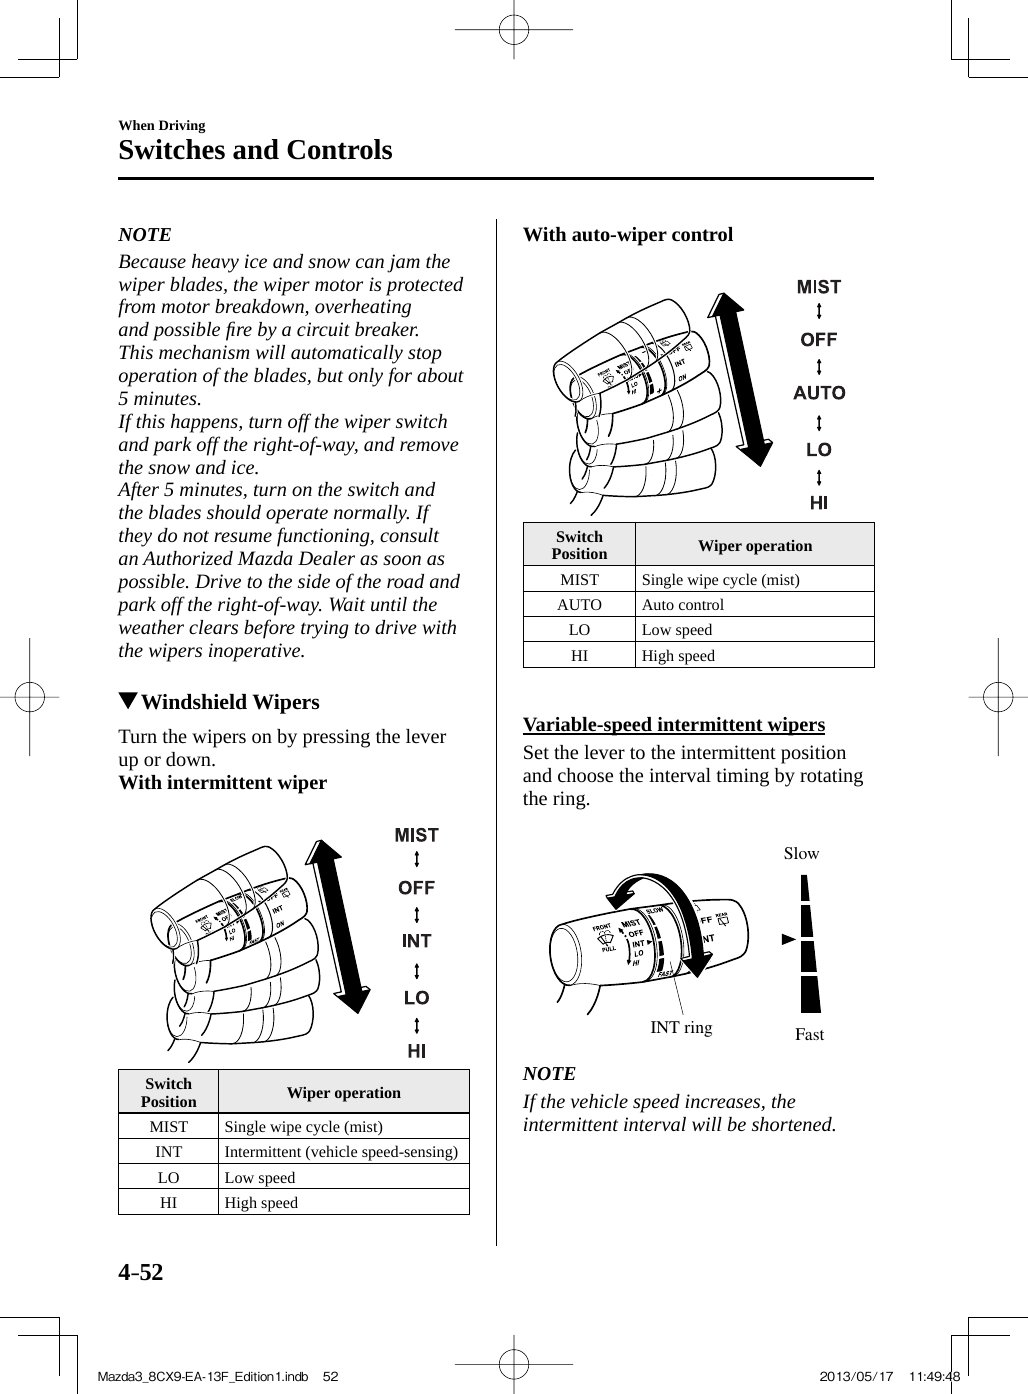 4–52When DrivingSwitches and Controls   NOTE  Because heavy ice and snow can jam the wiper blades, the wiper motor is protected from motor breakdown, overheating and possible ﬁ re by a circuit breaker. This mechanism will automatically stop operation of the blades, but only for about 5 minutes.  If this happens, turn off the wiper switch and park off the right-of-way, and remove the snow and ice.  After 5 minutes, turn on the switch and the blades should operate normally. If they do not resume functioning, consult an Authorized Mazda Dealer as soon as possible. Drive to the side of the road and park off the right-of-way. Wait until the weather clears before trying to drive with the wipers inoperative.            Windshield Wipers            Turn  the  wipers  on  by  pressing  the  lever up or down.   With intermittent wiper      Switch Position   Wiper  operation   MIST    Single  wipe  cycle  (mist)   INT    Intermittent  (vehicle  speed-sensing)   LO    Low  speed   HI    High  speed       With auto-wiper control      Switch Position   Wiper  operation   MIST    Single  wipe  cycle  (mist)   AUTO    Auto  control   LO    Low  speed   HI    High  speed      Variable-speed  intermittent  wipers    Set the lever to the intermittent position and choose the interval timing by rotating the ring.   INT ring FastSlow    NOTE  If the vehicle speed increases, the intermittent interval will be shortened.     Mazda3_8CX9-EA-13F_Edition1.indb   52Mazda3_8CX9-EA-13F_Edition1.indb   52 2013/05/17   11:49:482013/05/17   11:49:48